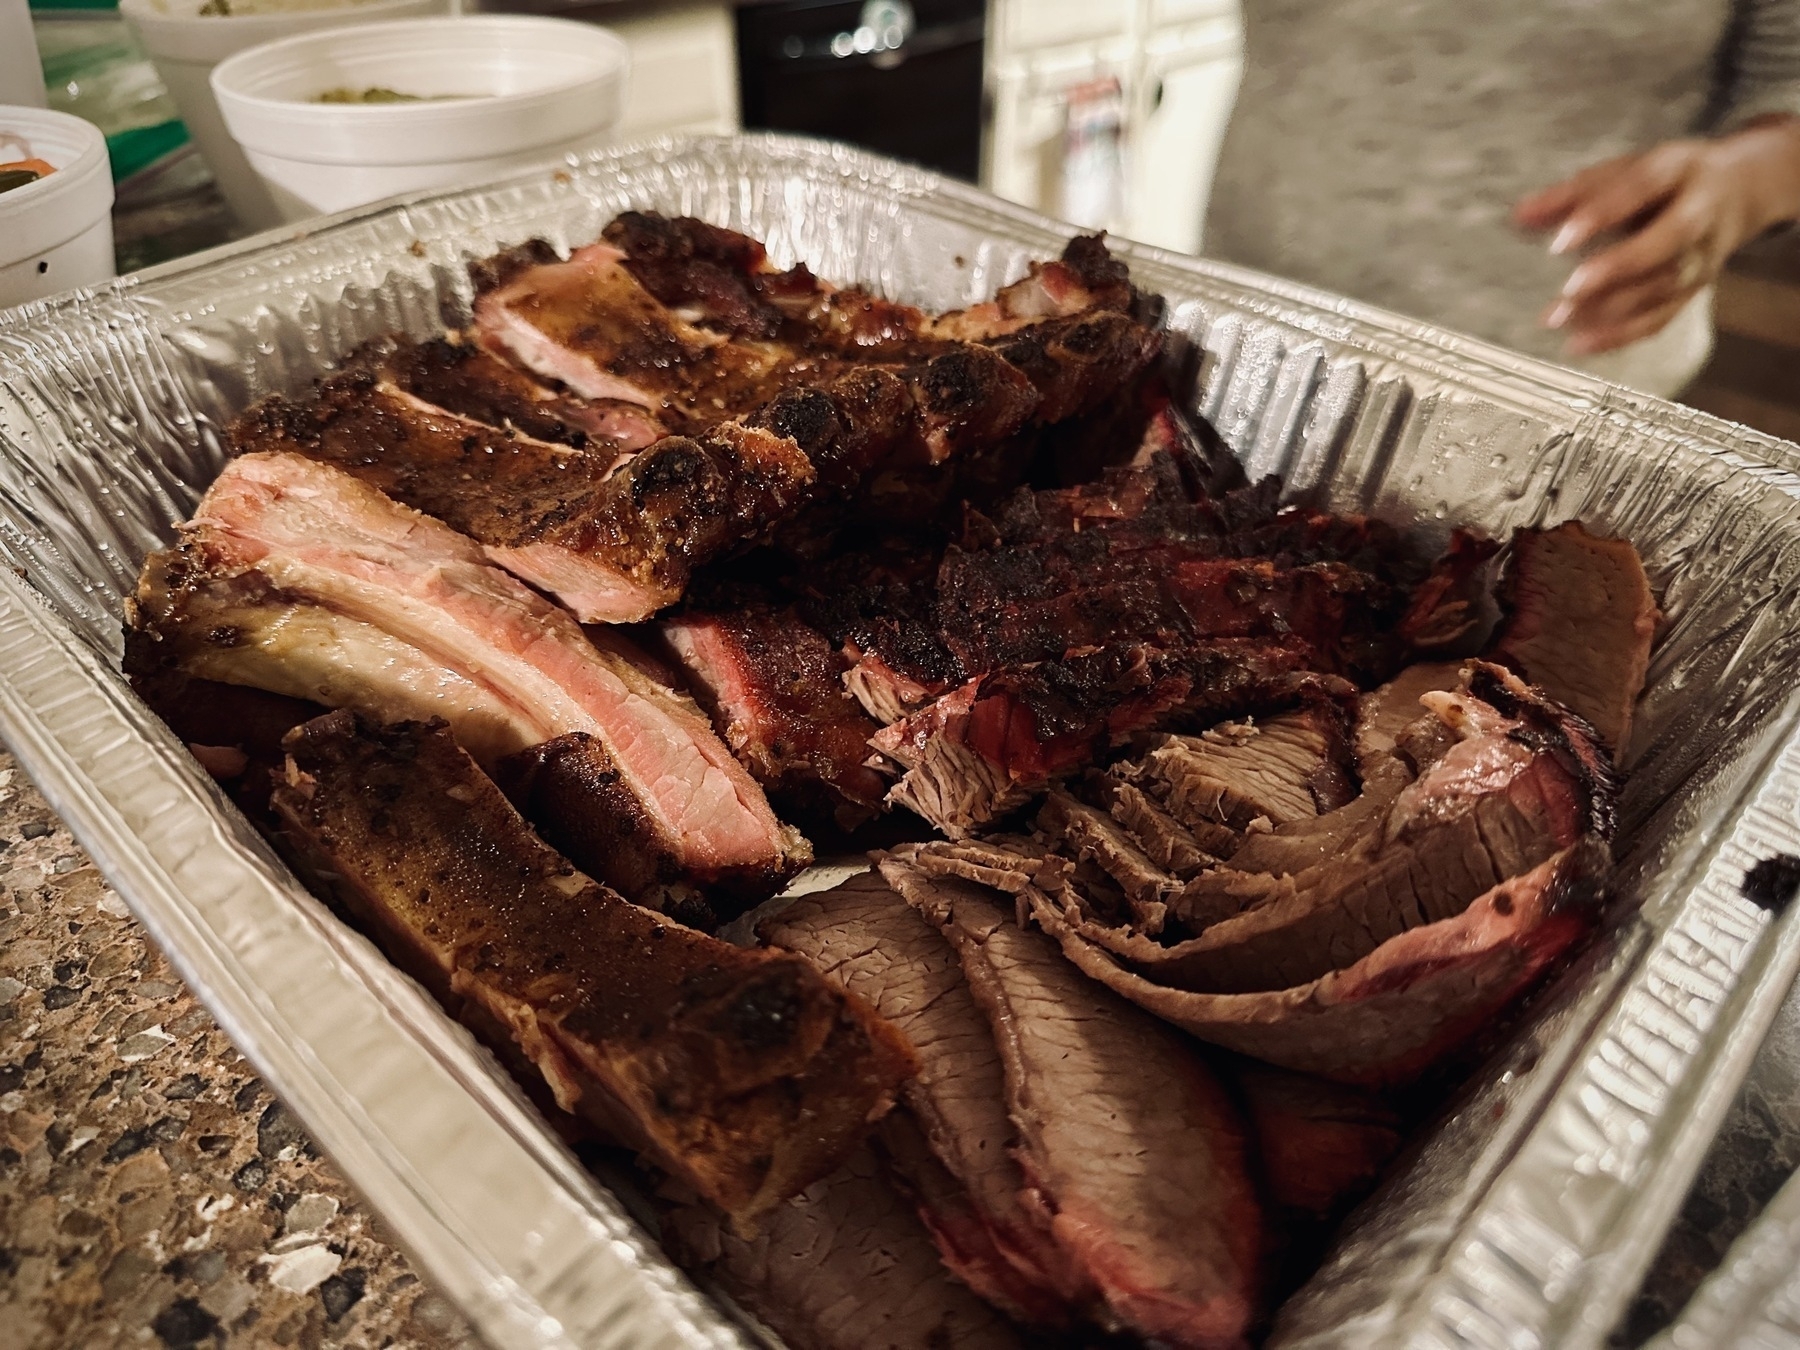 Close up of a box of brisket and ribs from Rudy's in Austin, sitting on a stone bench top, with cups of sies in the background.